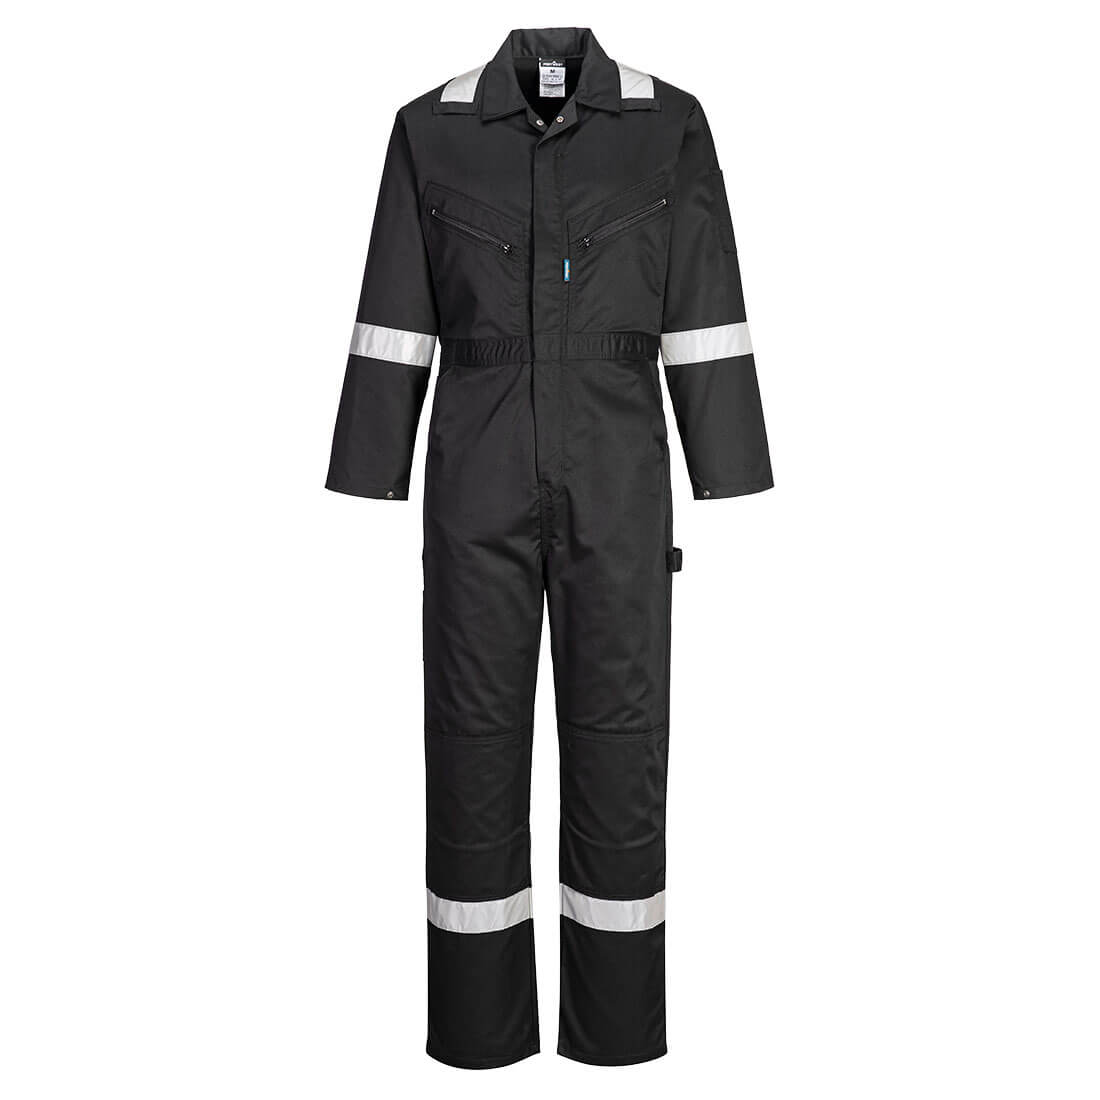 Iona Coverall, Morgans PW